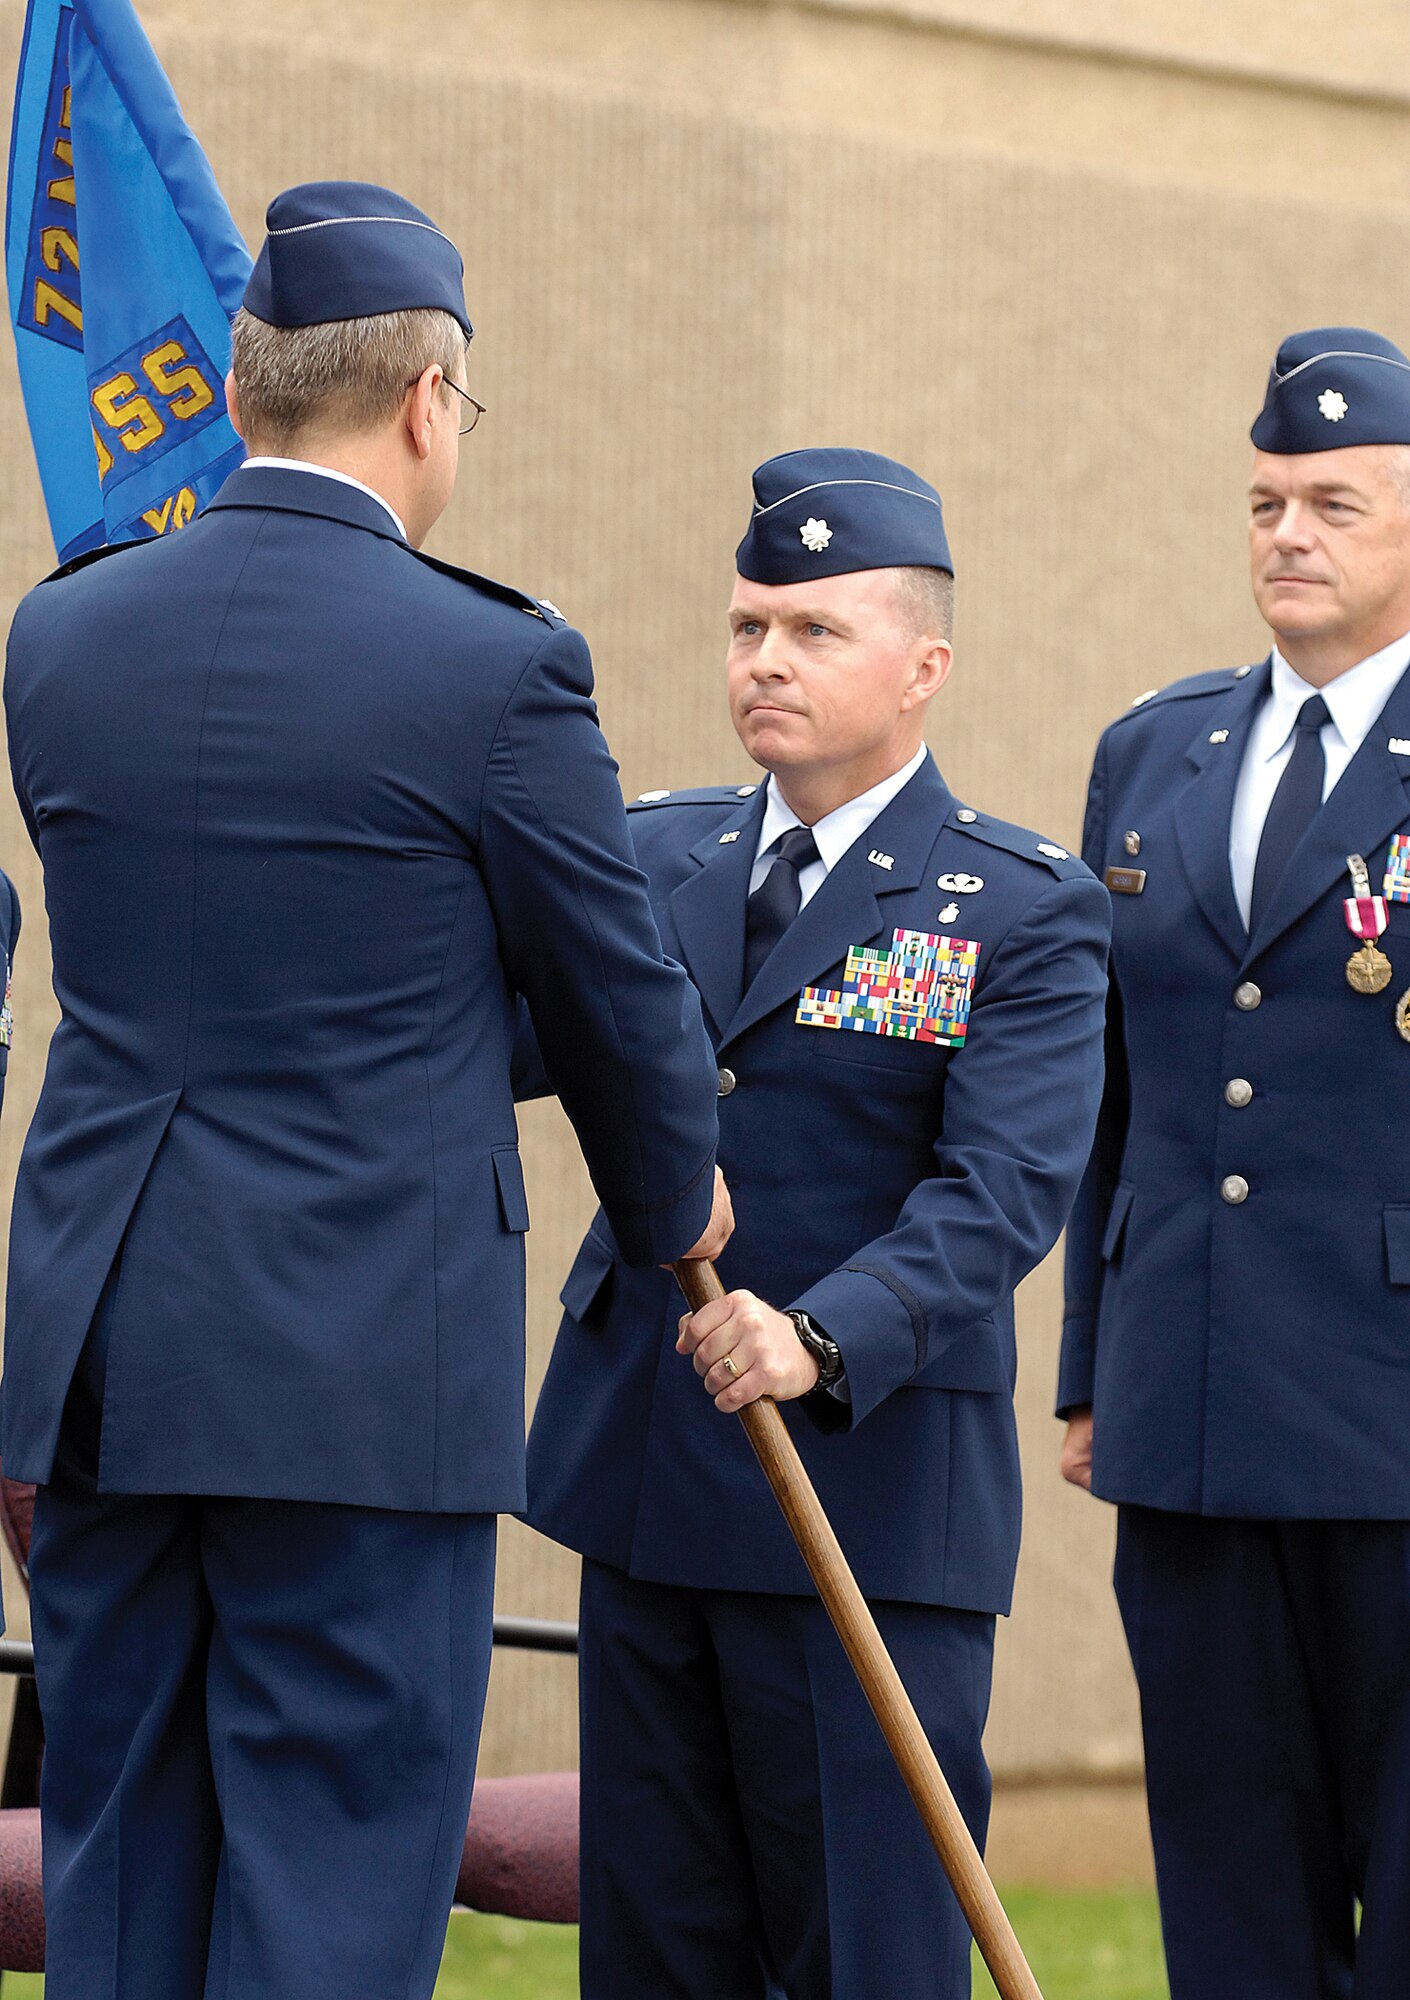 Lt. Col. Timothy Dykens accepts the 72nd Medical Support Squadron’s guidon from Col. Robert Marks during a June 12 change of command ceremony at the 72nd Medical Group facility. (Air Force photo by Margo Wright)